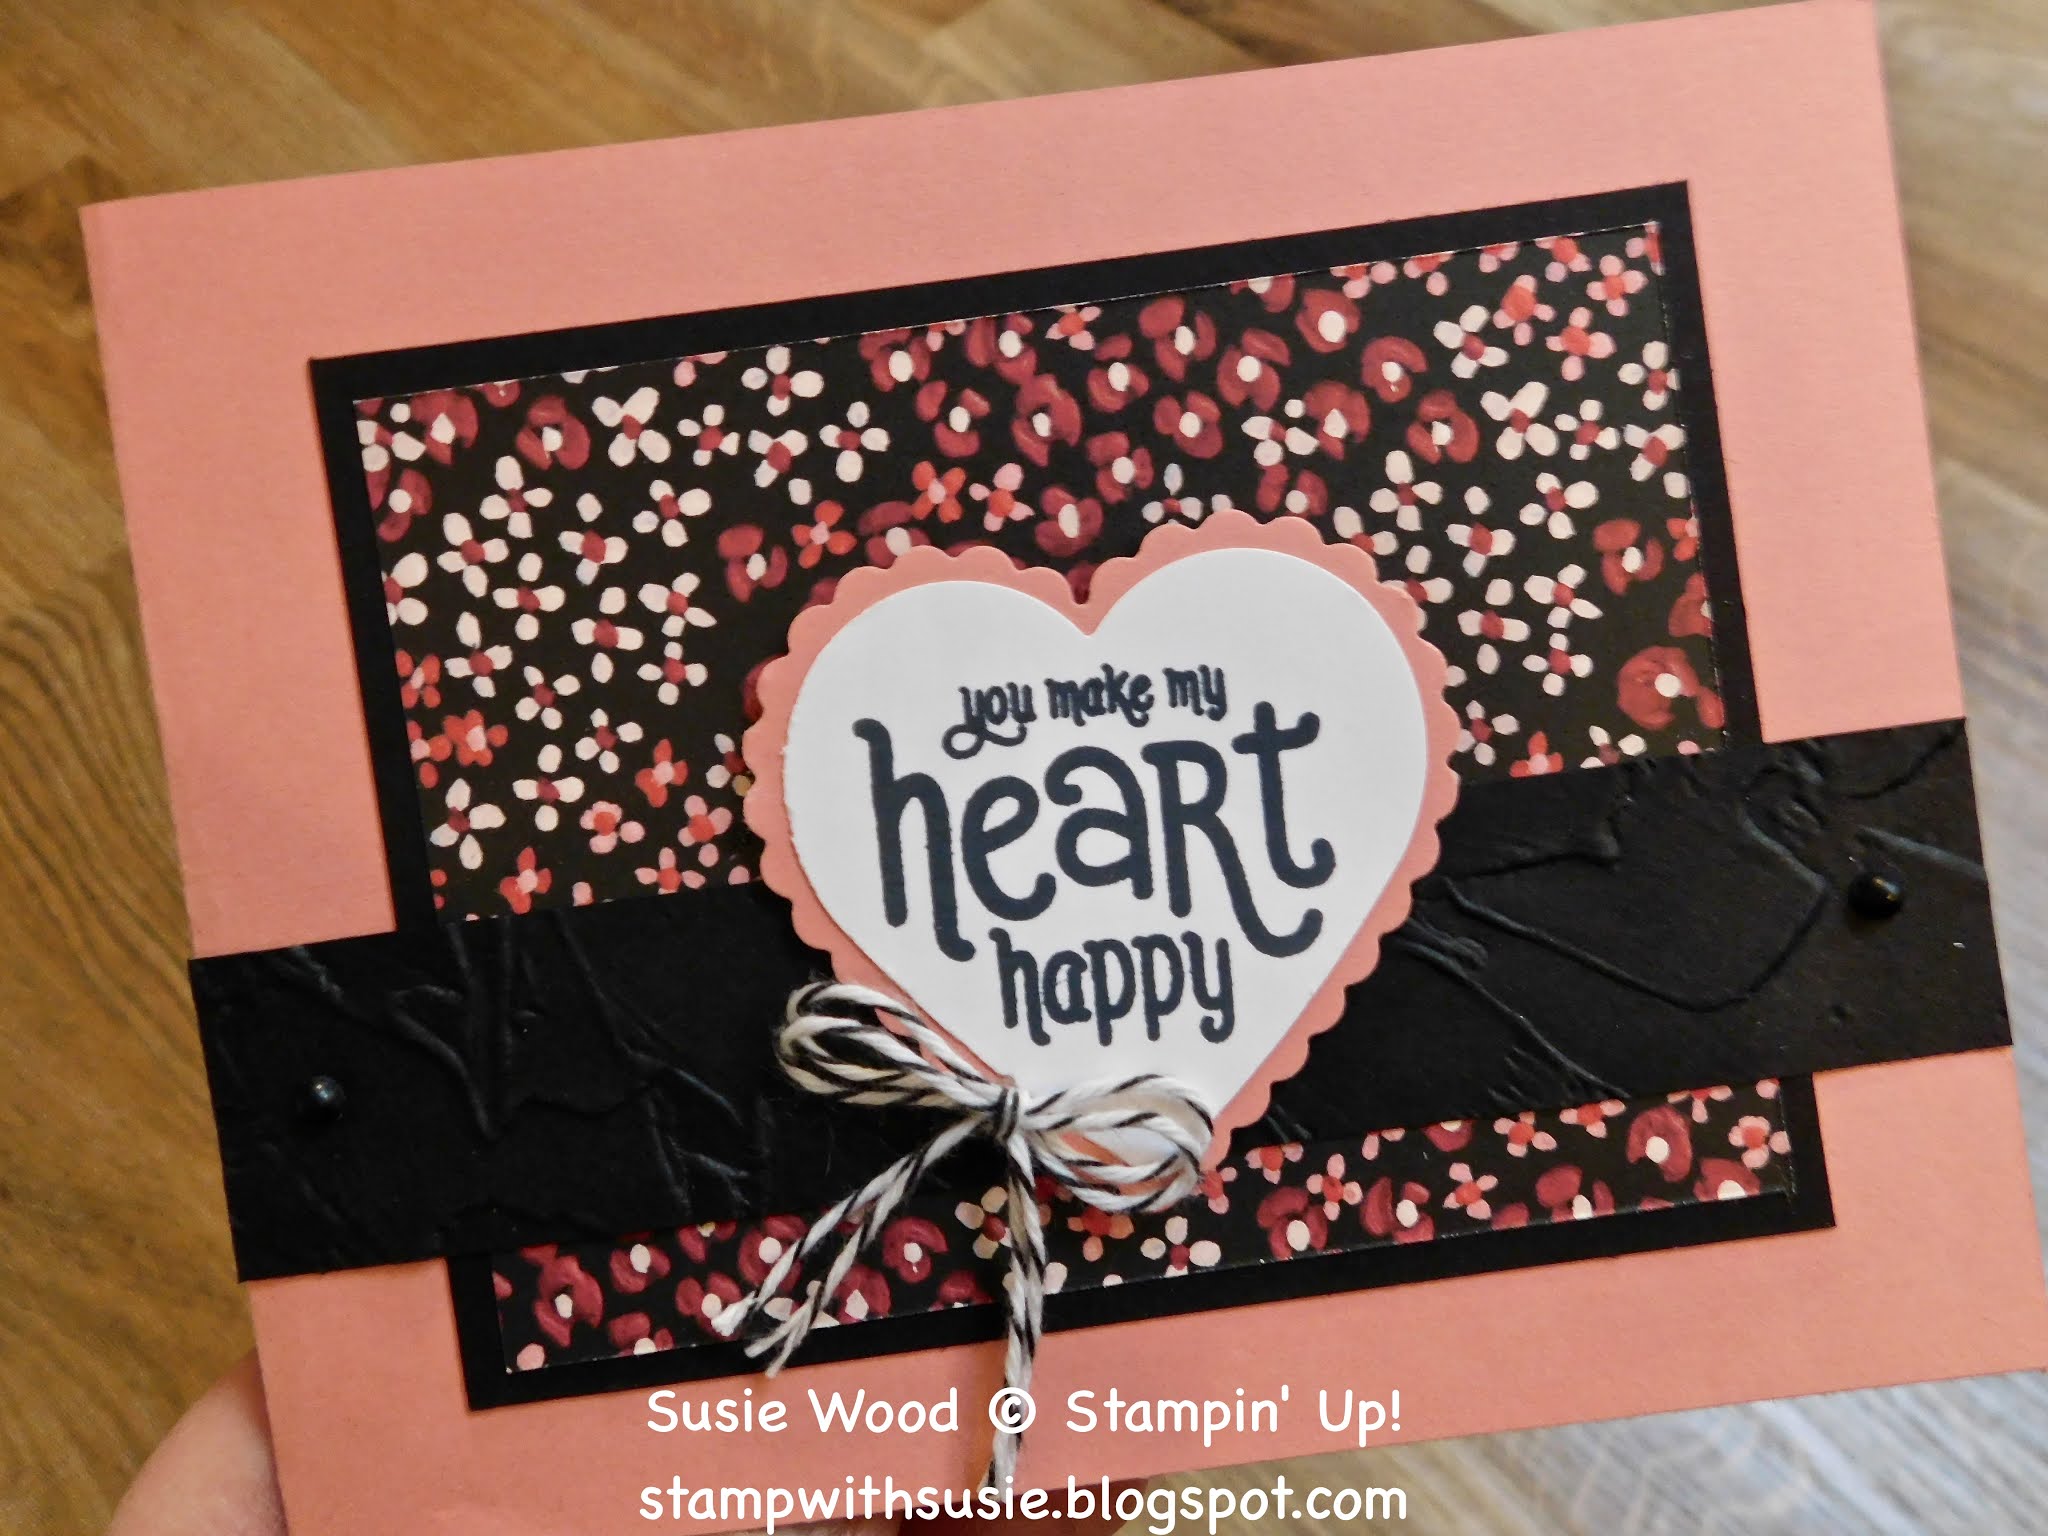 Heart Punch Pack Stampin' Up! stamp set